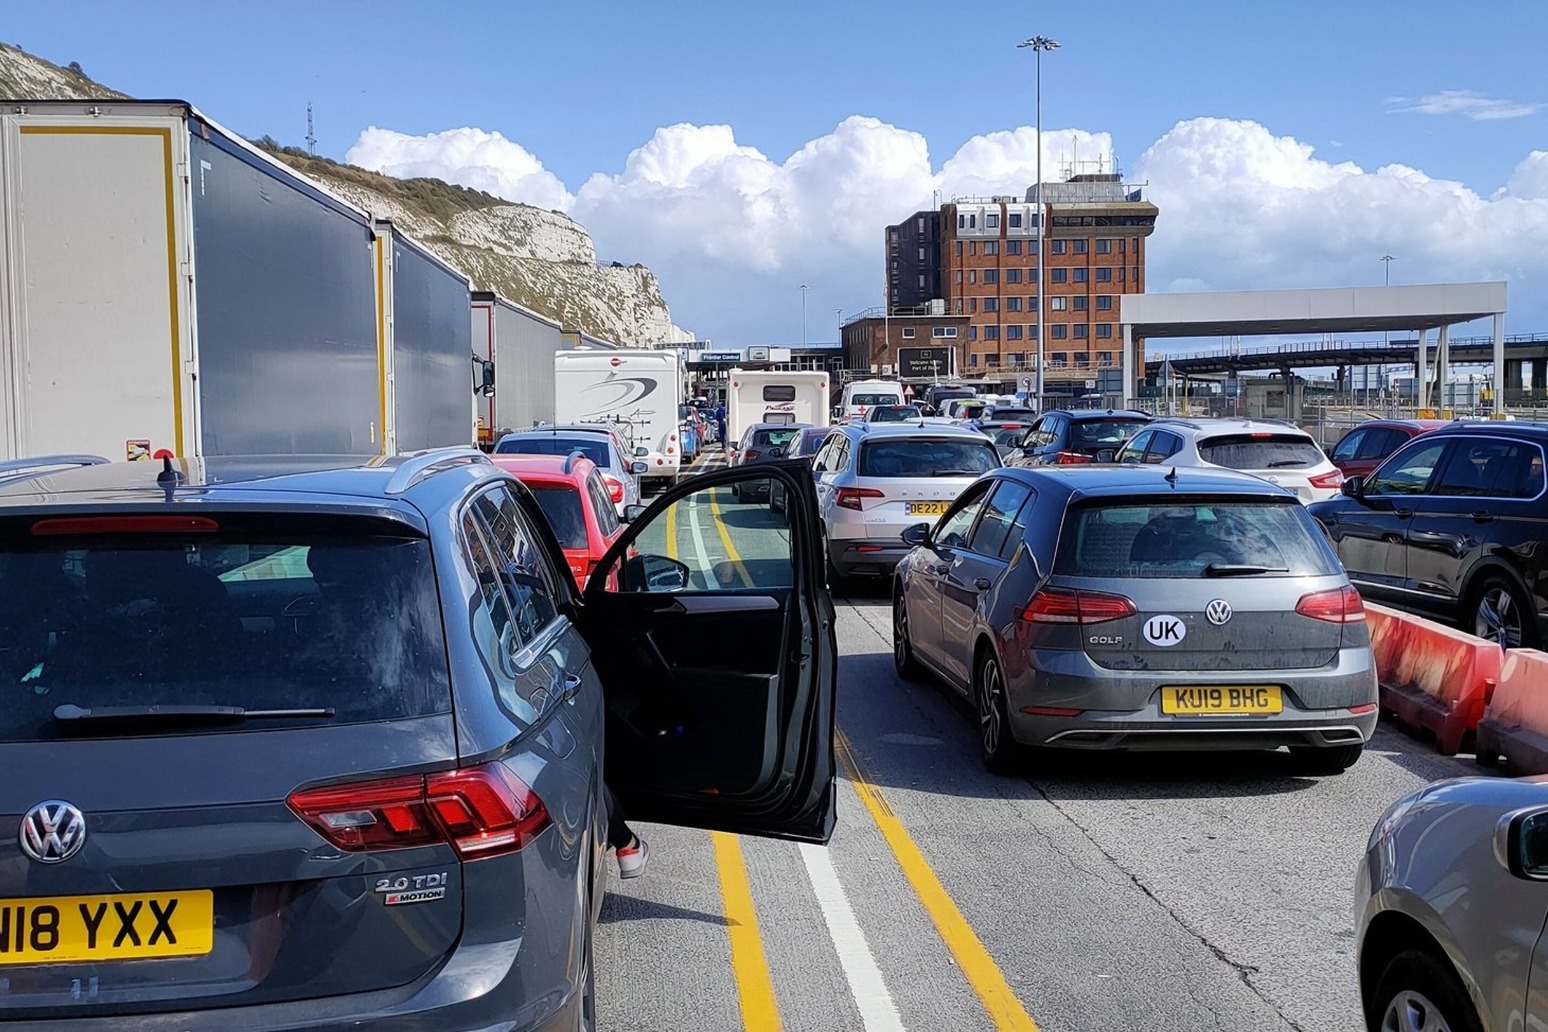 Cross-Channel disruption plunges Dover into traffic chaos near port 